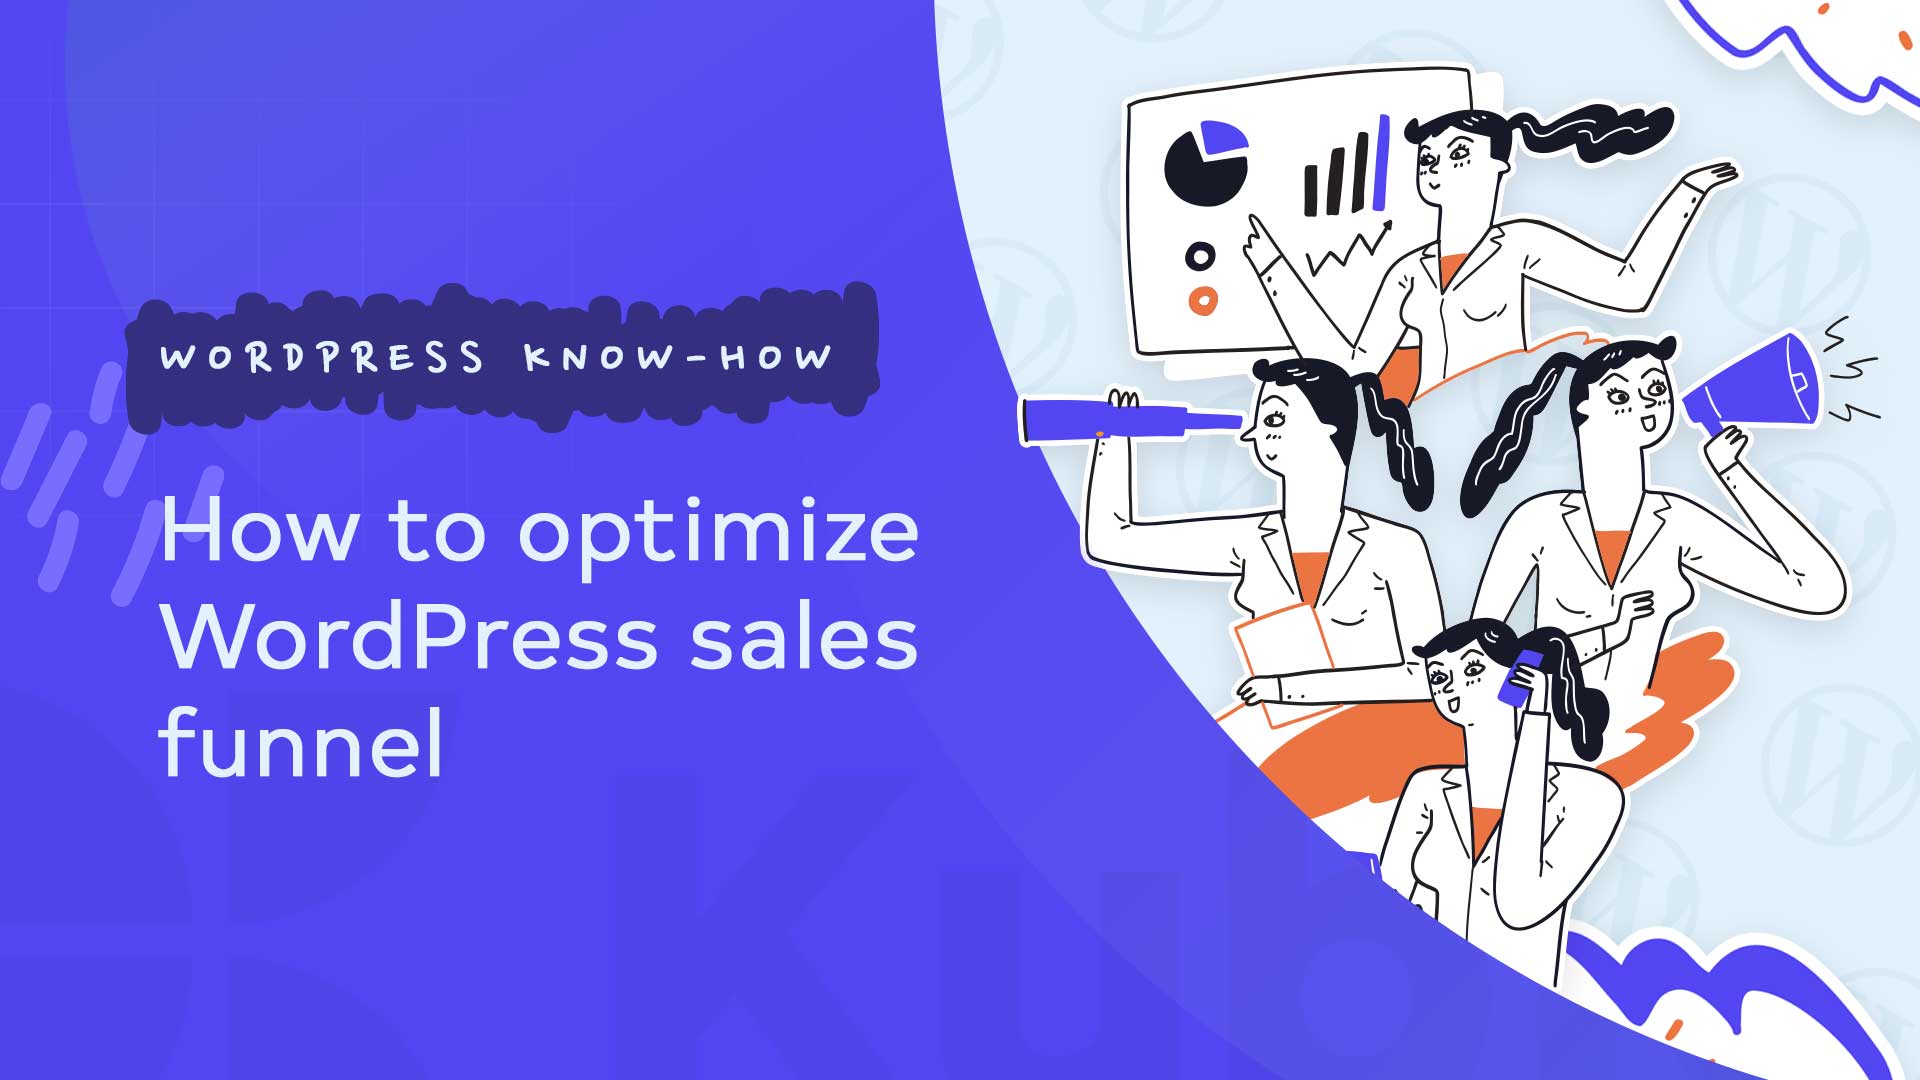 How to optimize WordPress sales funnel